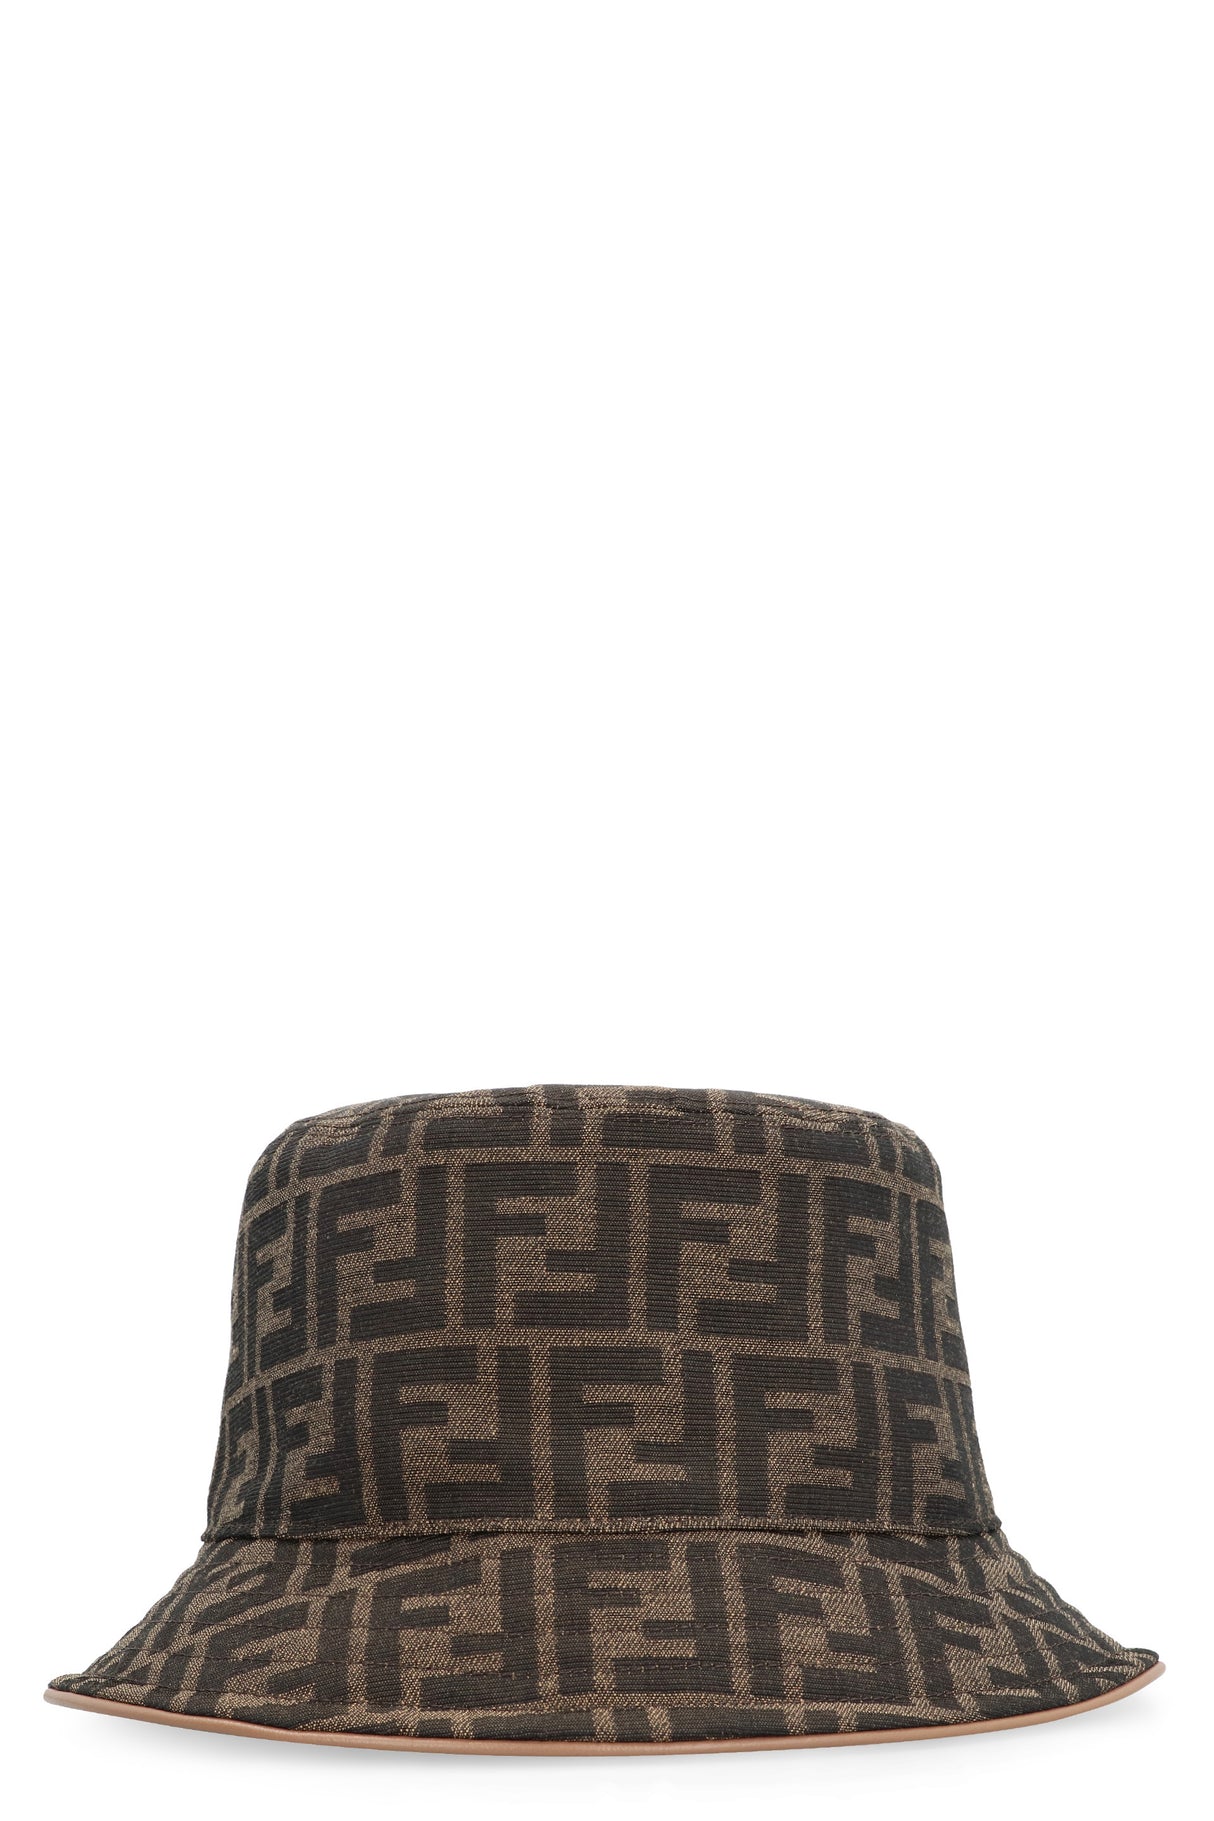 FENDI Brown All-Over Jacquard Logo Bucket Hat for Women - SS24 Collection